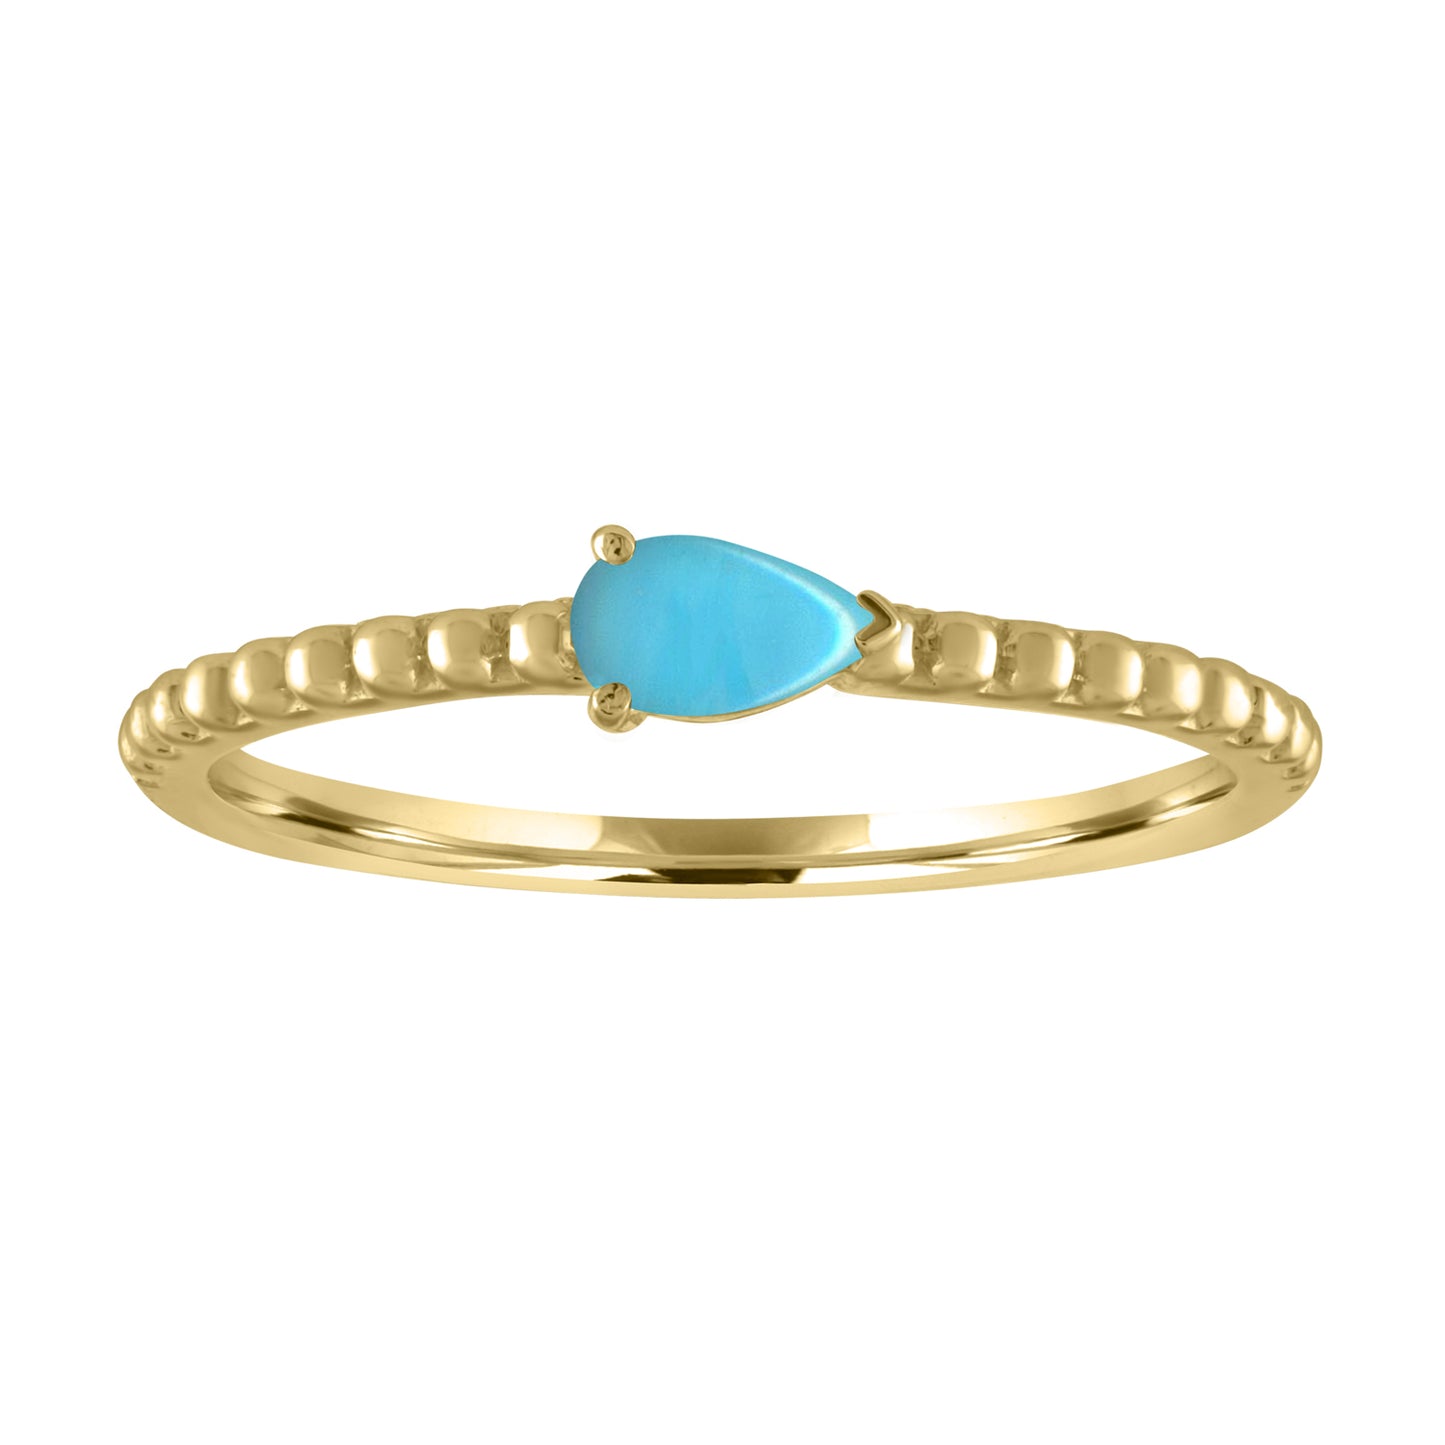 Yellow gold beaded skinny band with a pear shaped turquoise in the center. 